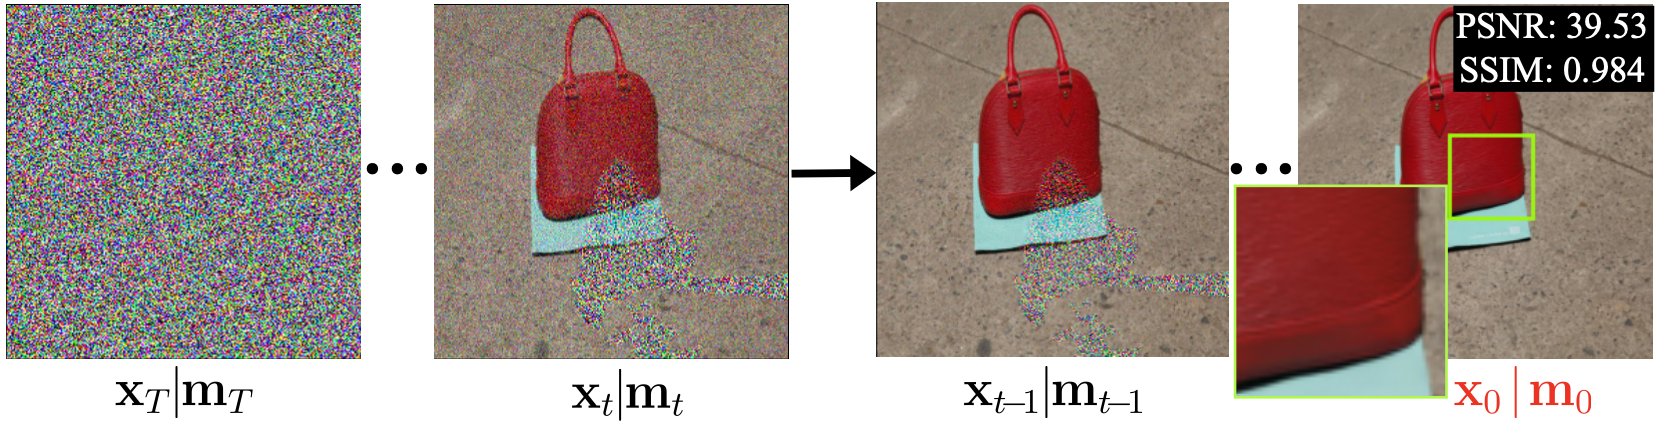 ShadowDiffusion: When Degradation Prior Meets Diffusion Model for Shadow Removal